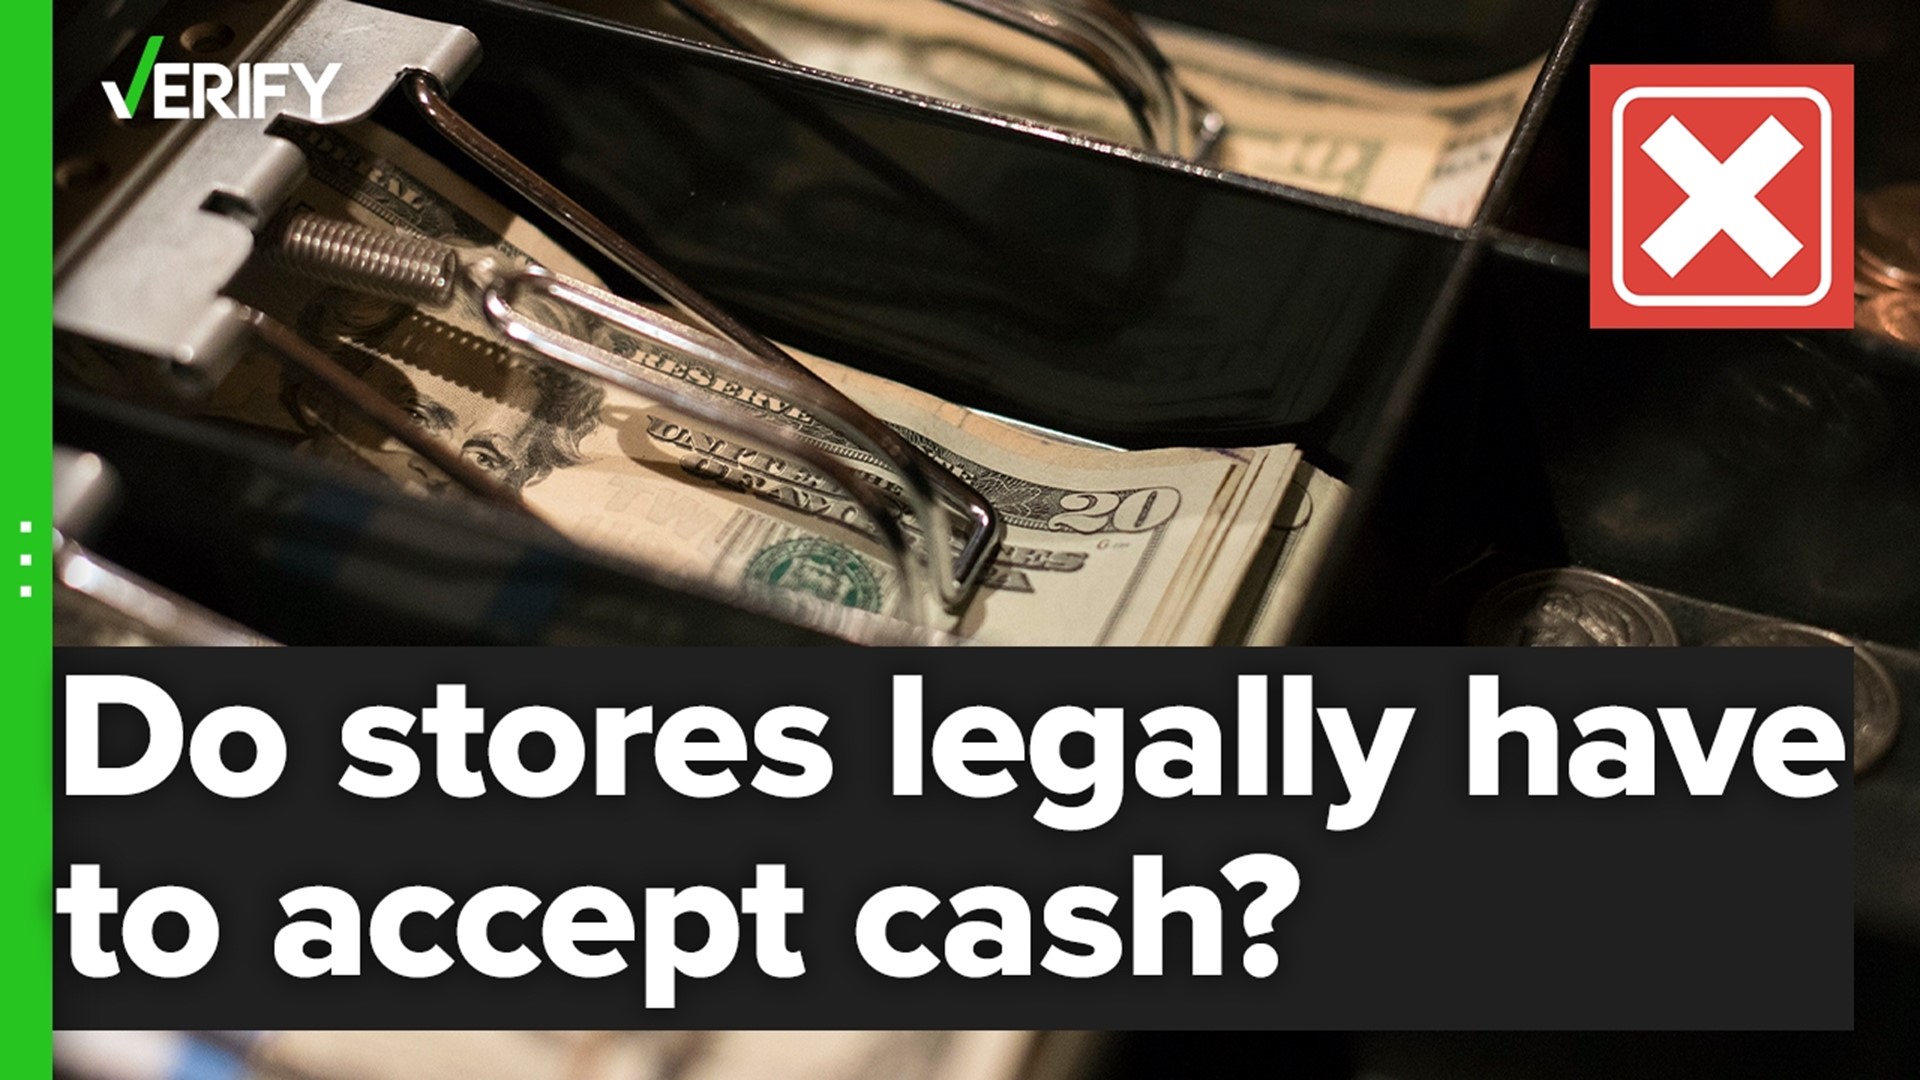 There is no federal law mandating that a private business accept cash as payment for goods or services, as some social media posts claim.